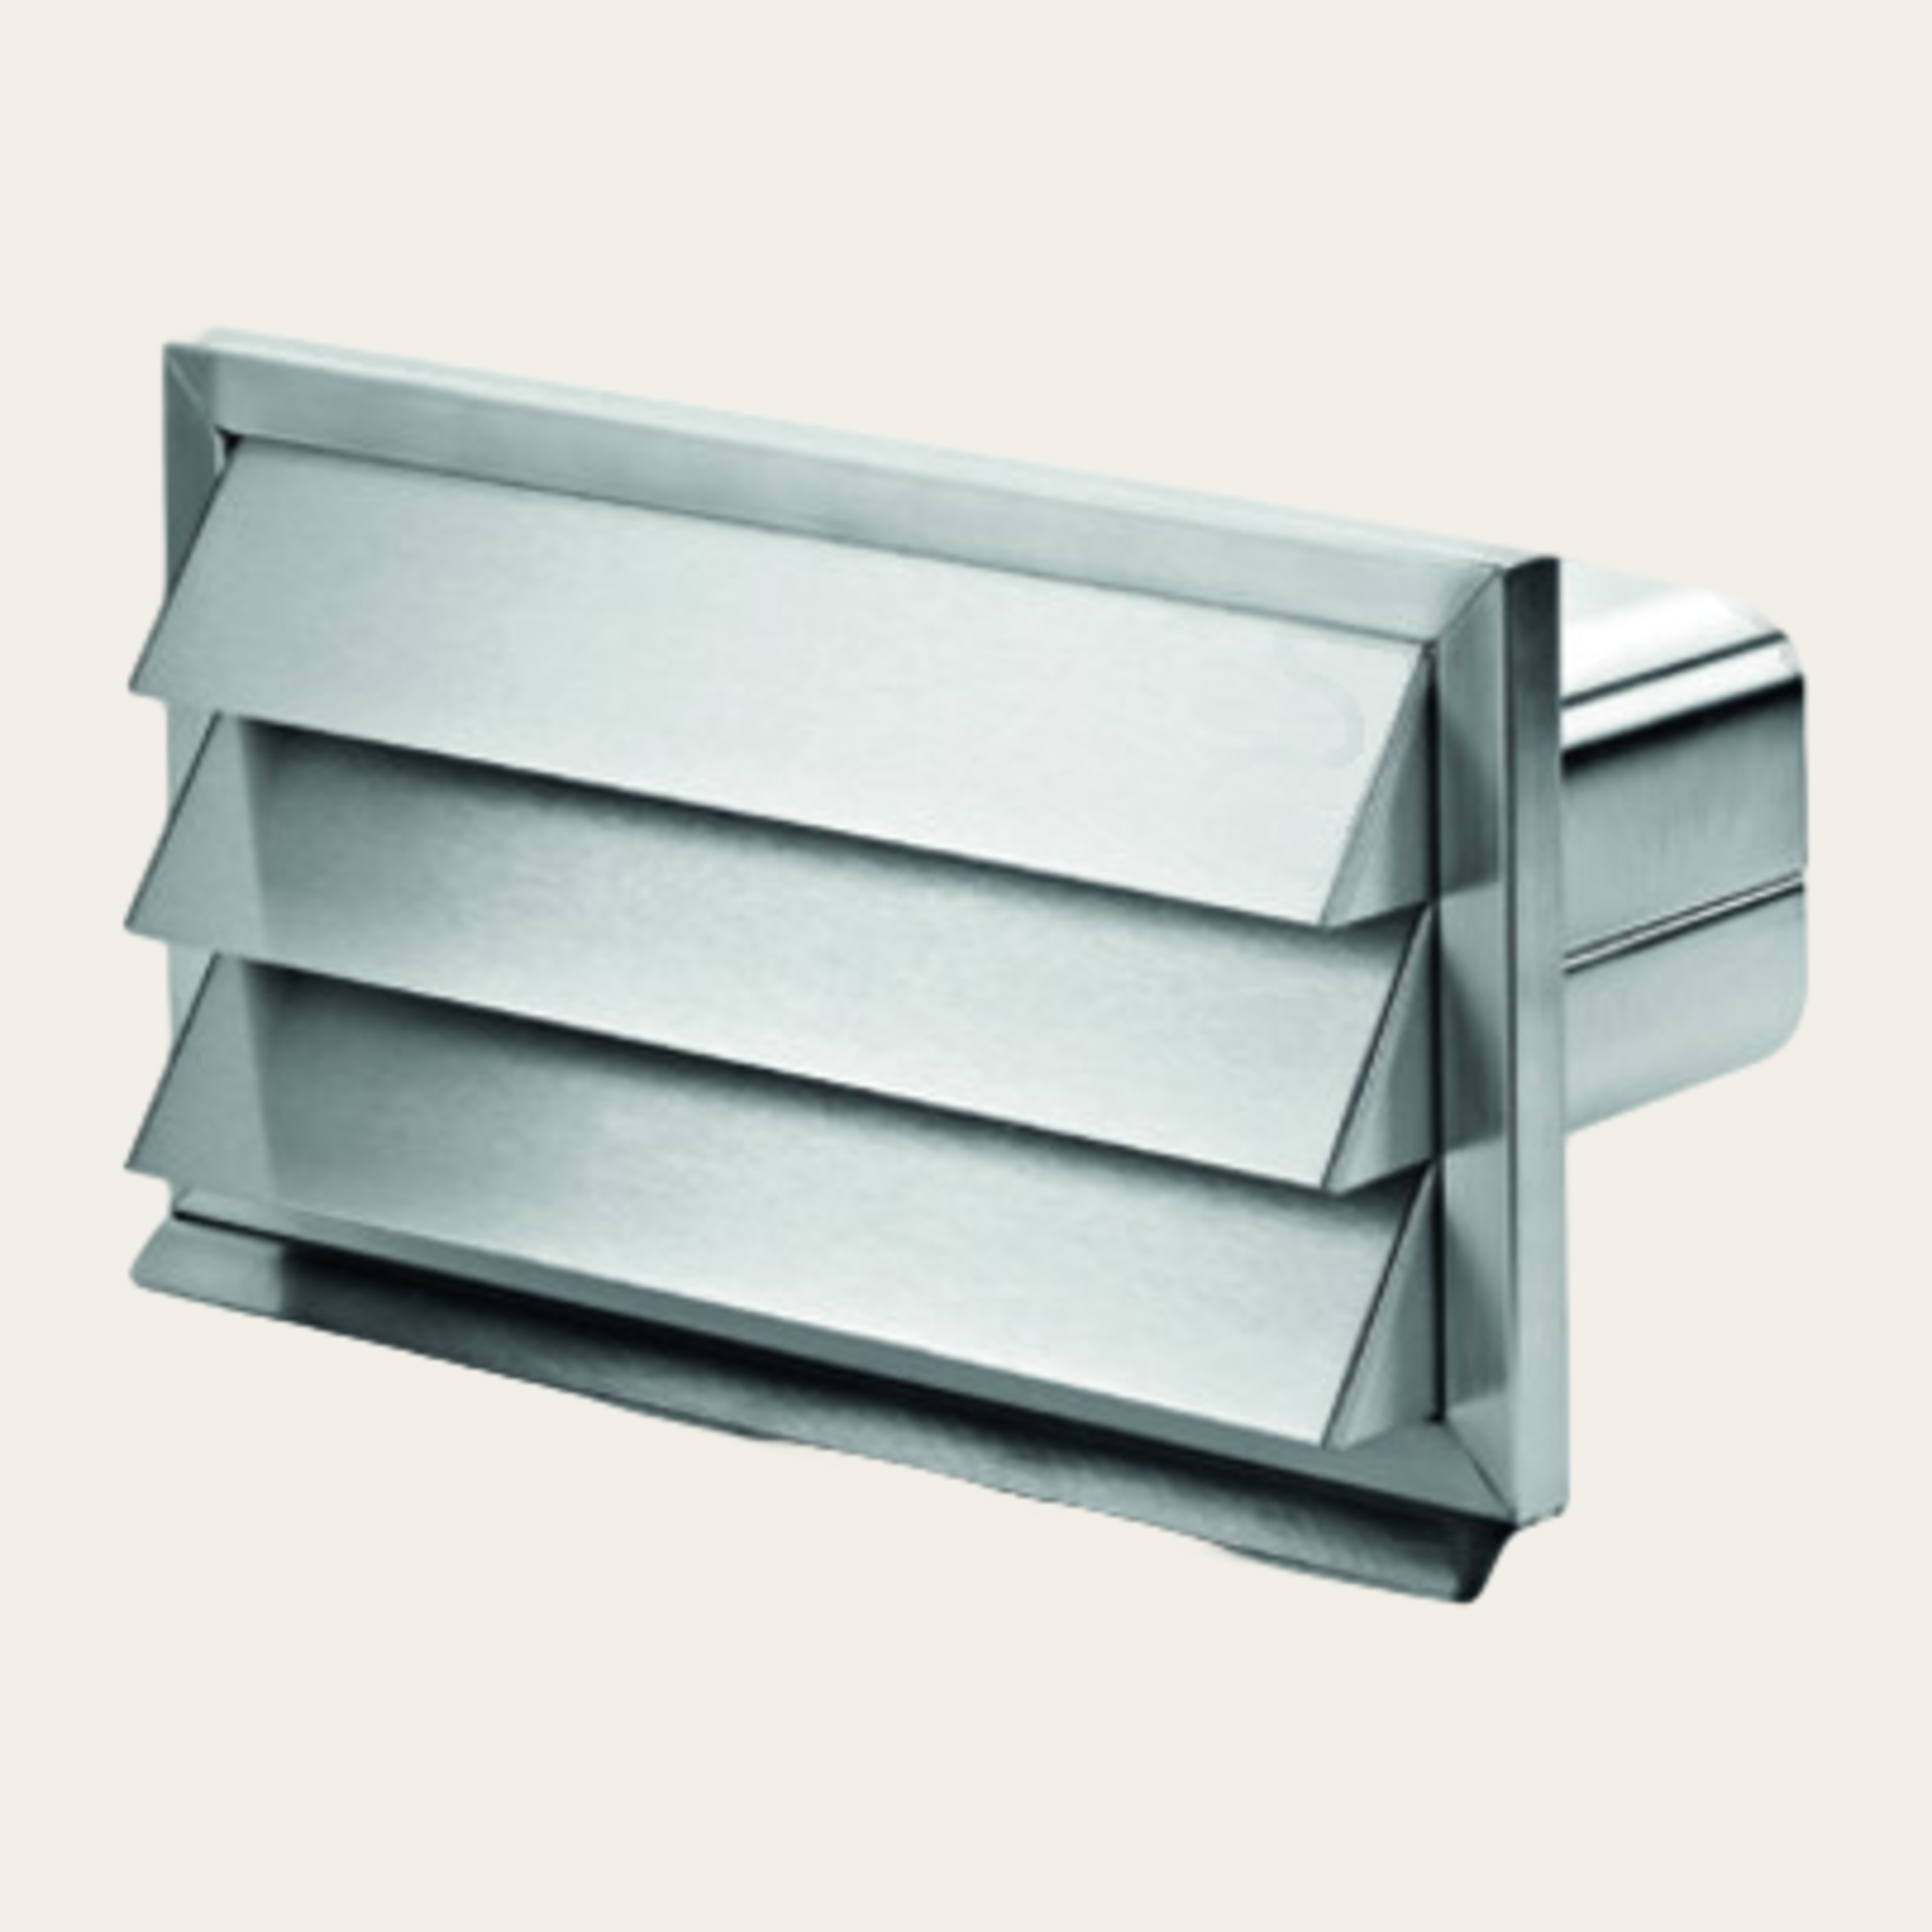 Weather protection louvre stainless steel with non-return flap W 290 x H 160 mm for connection to flat channel W 222 x H 89 mm)